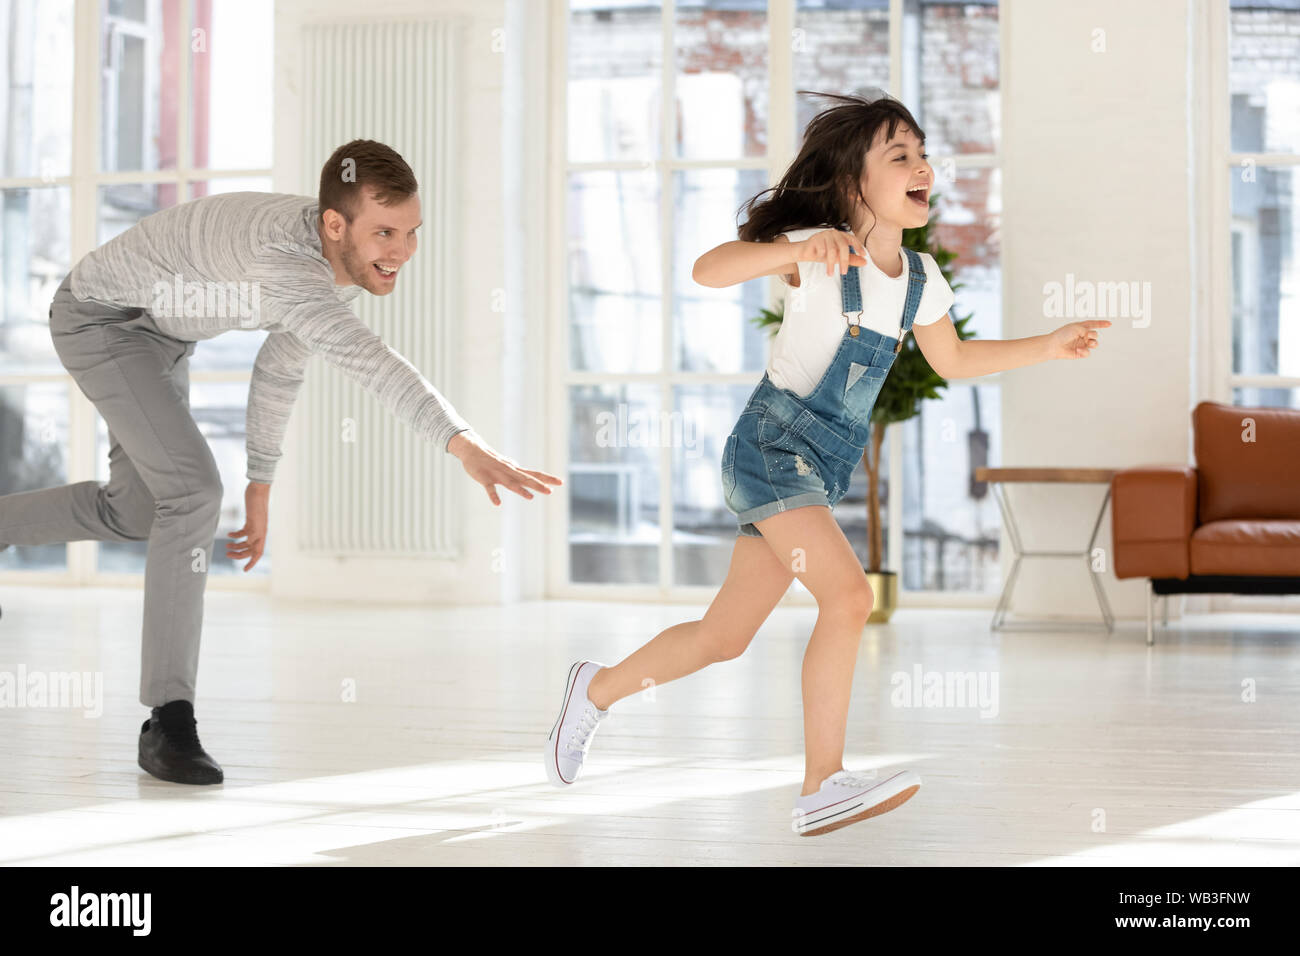 Cute child daughter running from dad playing tag game together Stock Photo